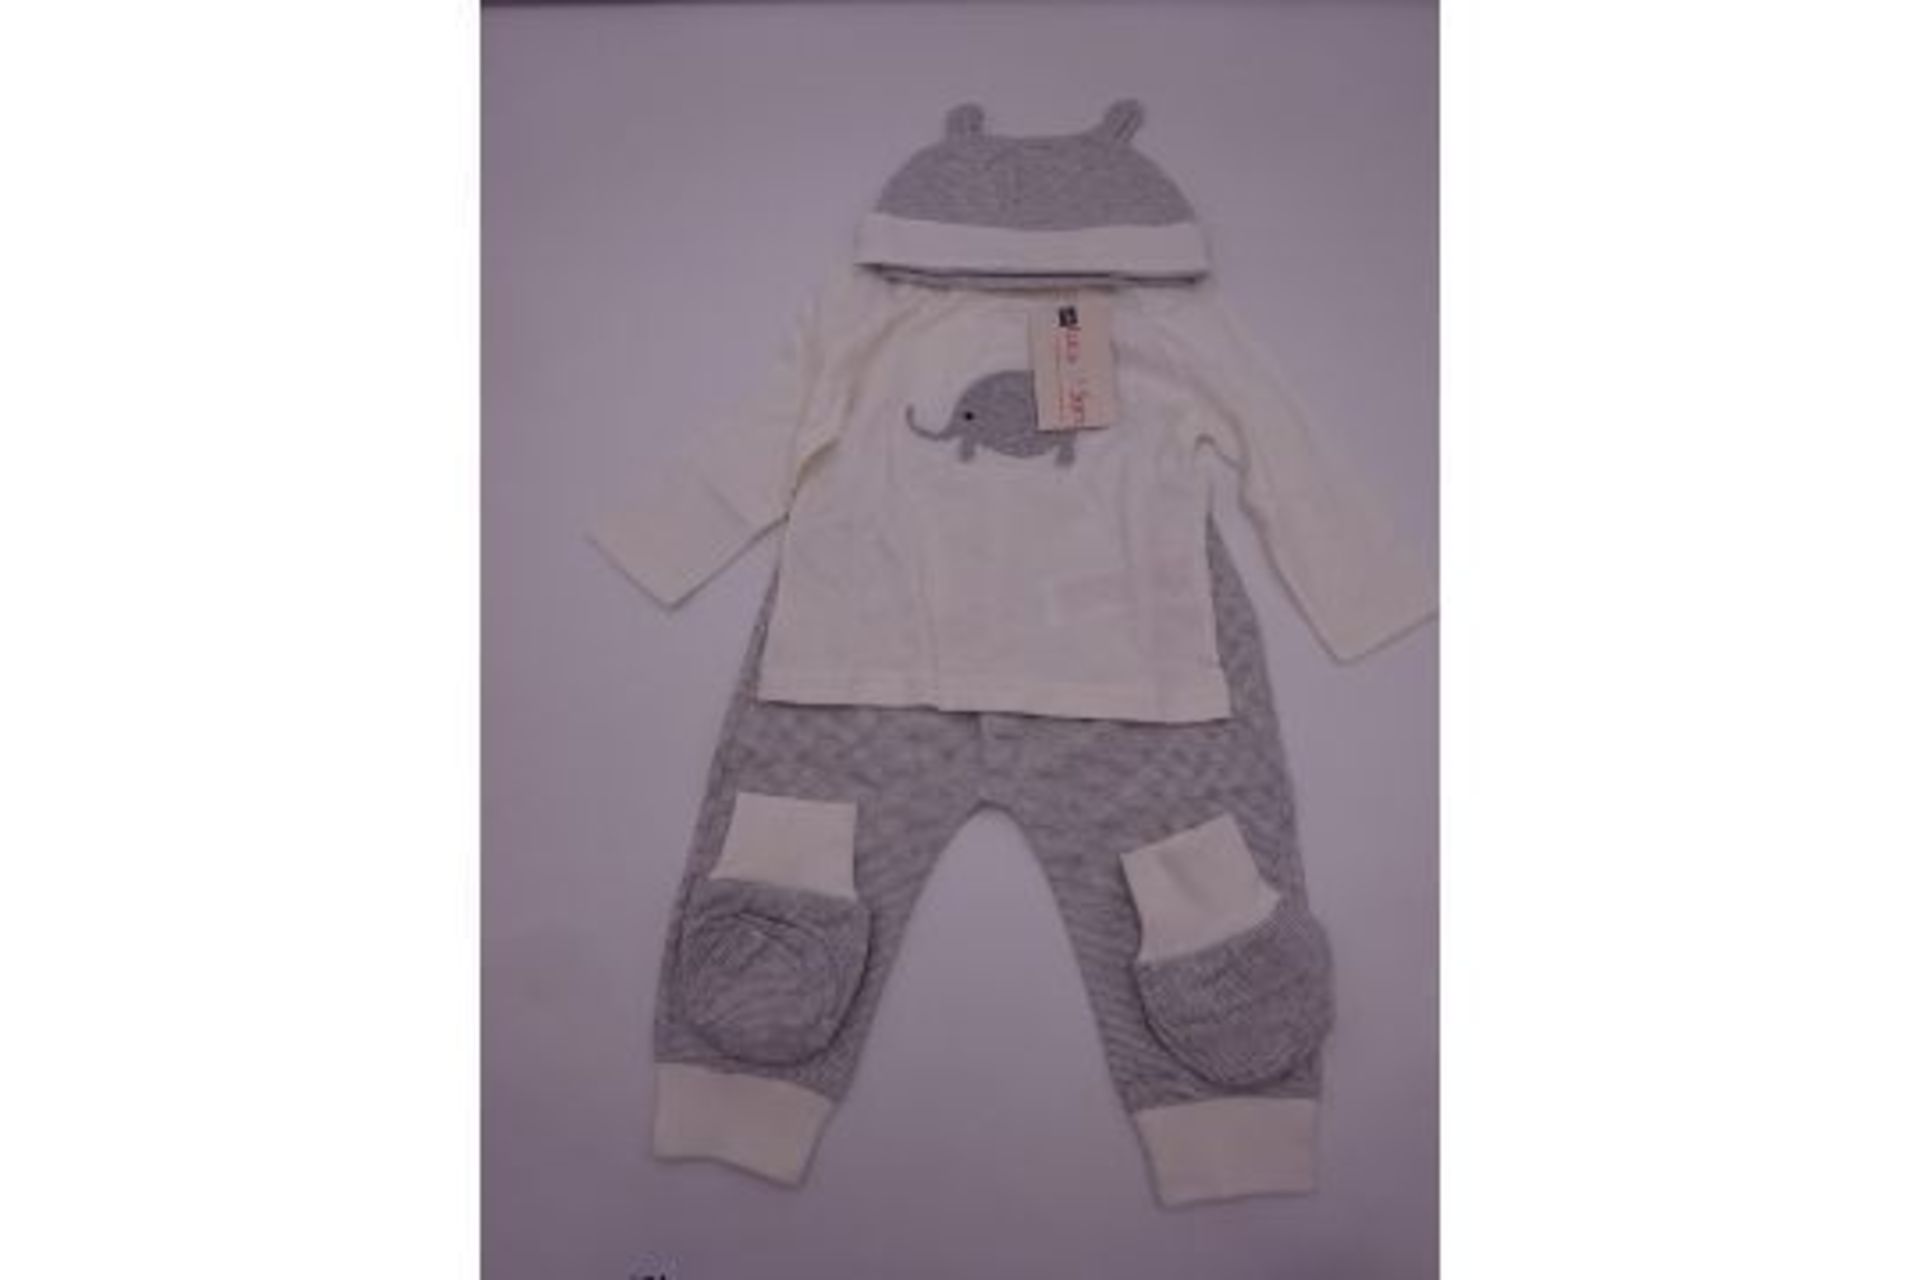 Elpant Babys Gift Set (9 to 12 months) - RRP £55.